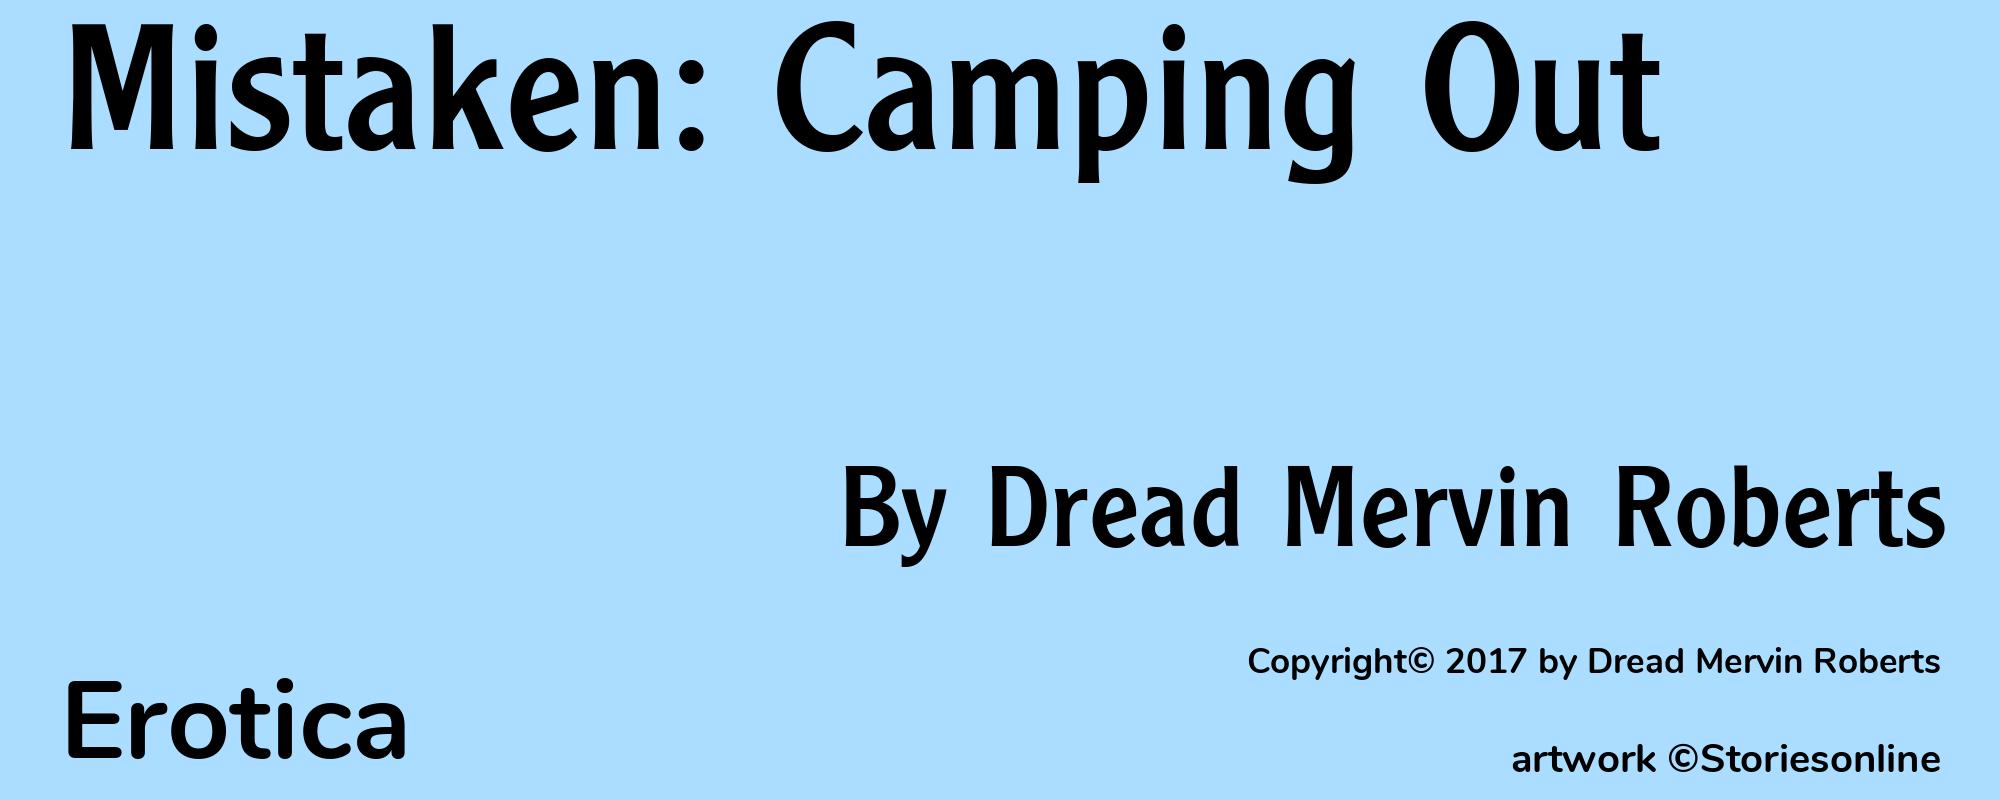 Mistaken: Camping Out - Cover